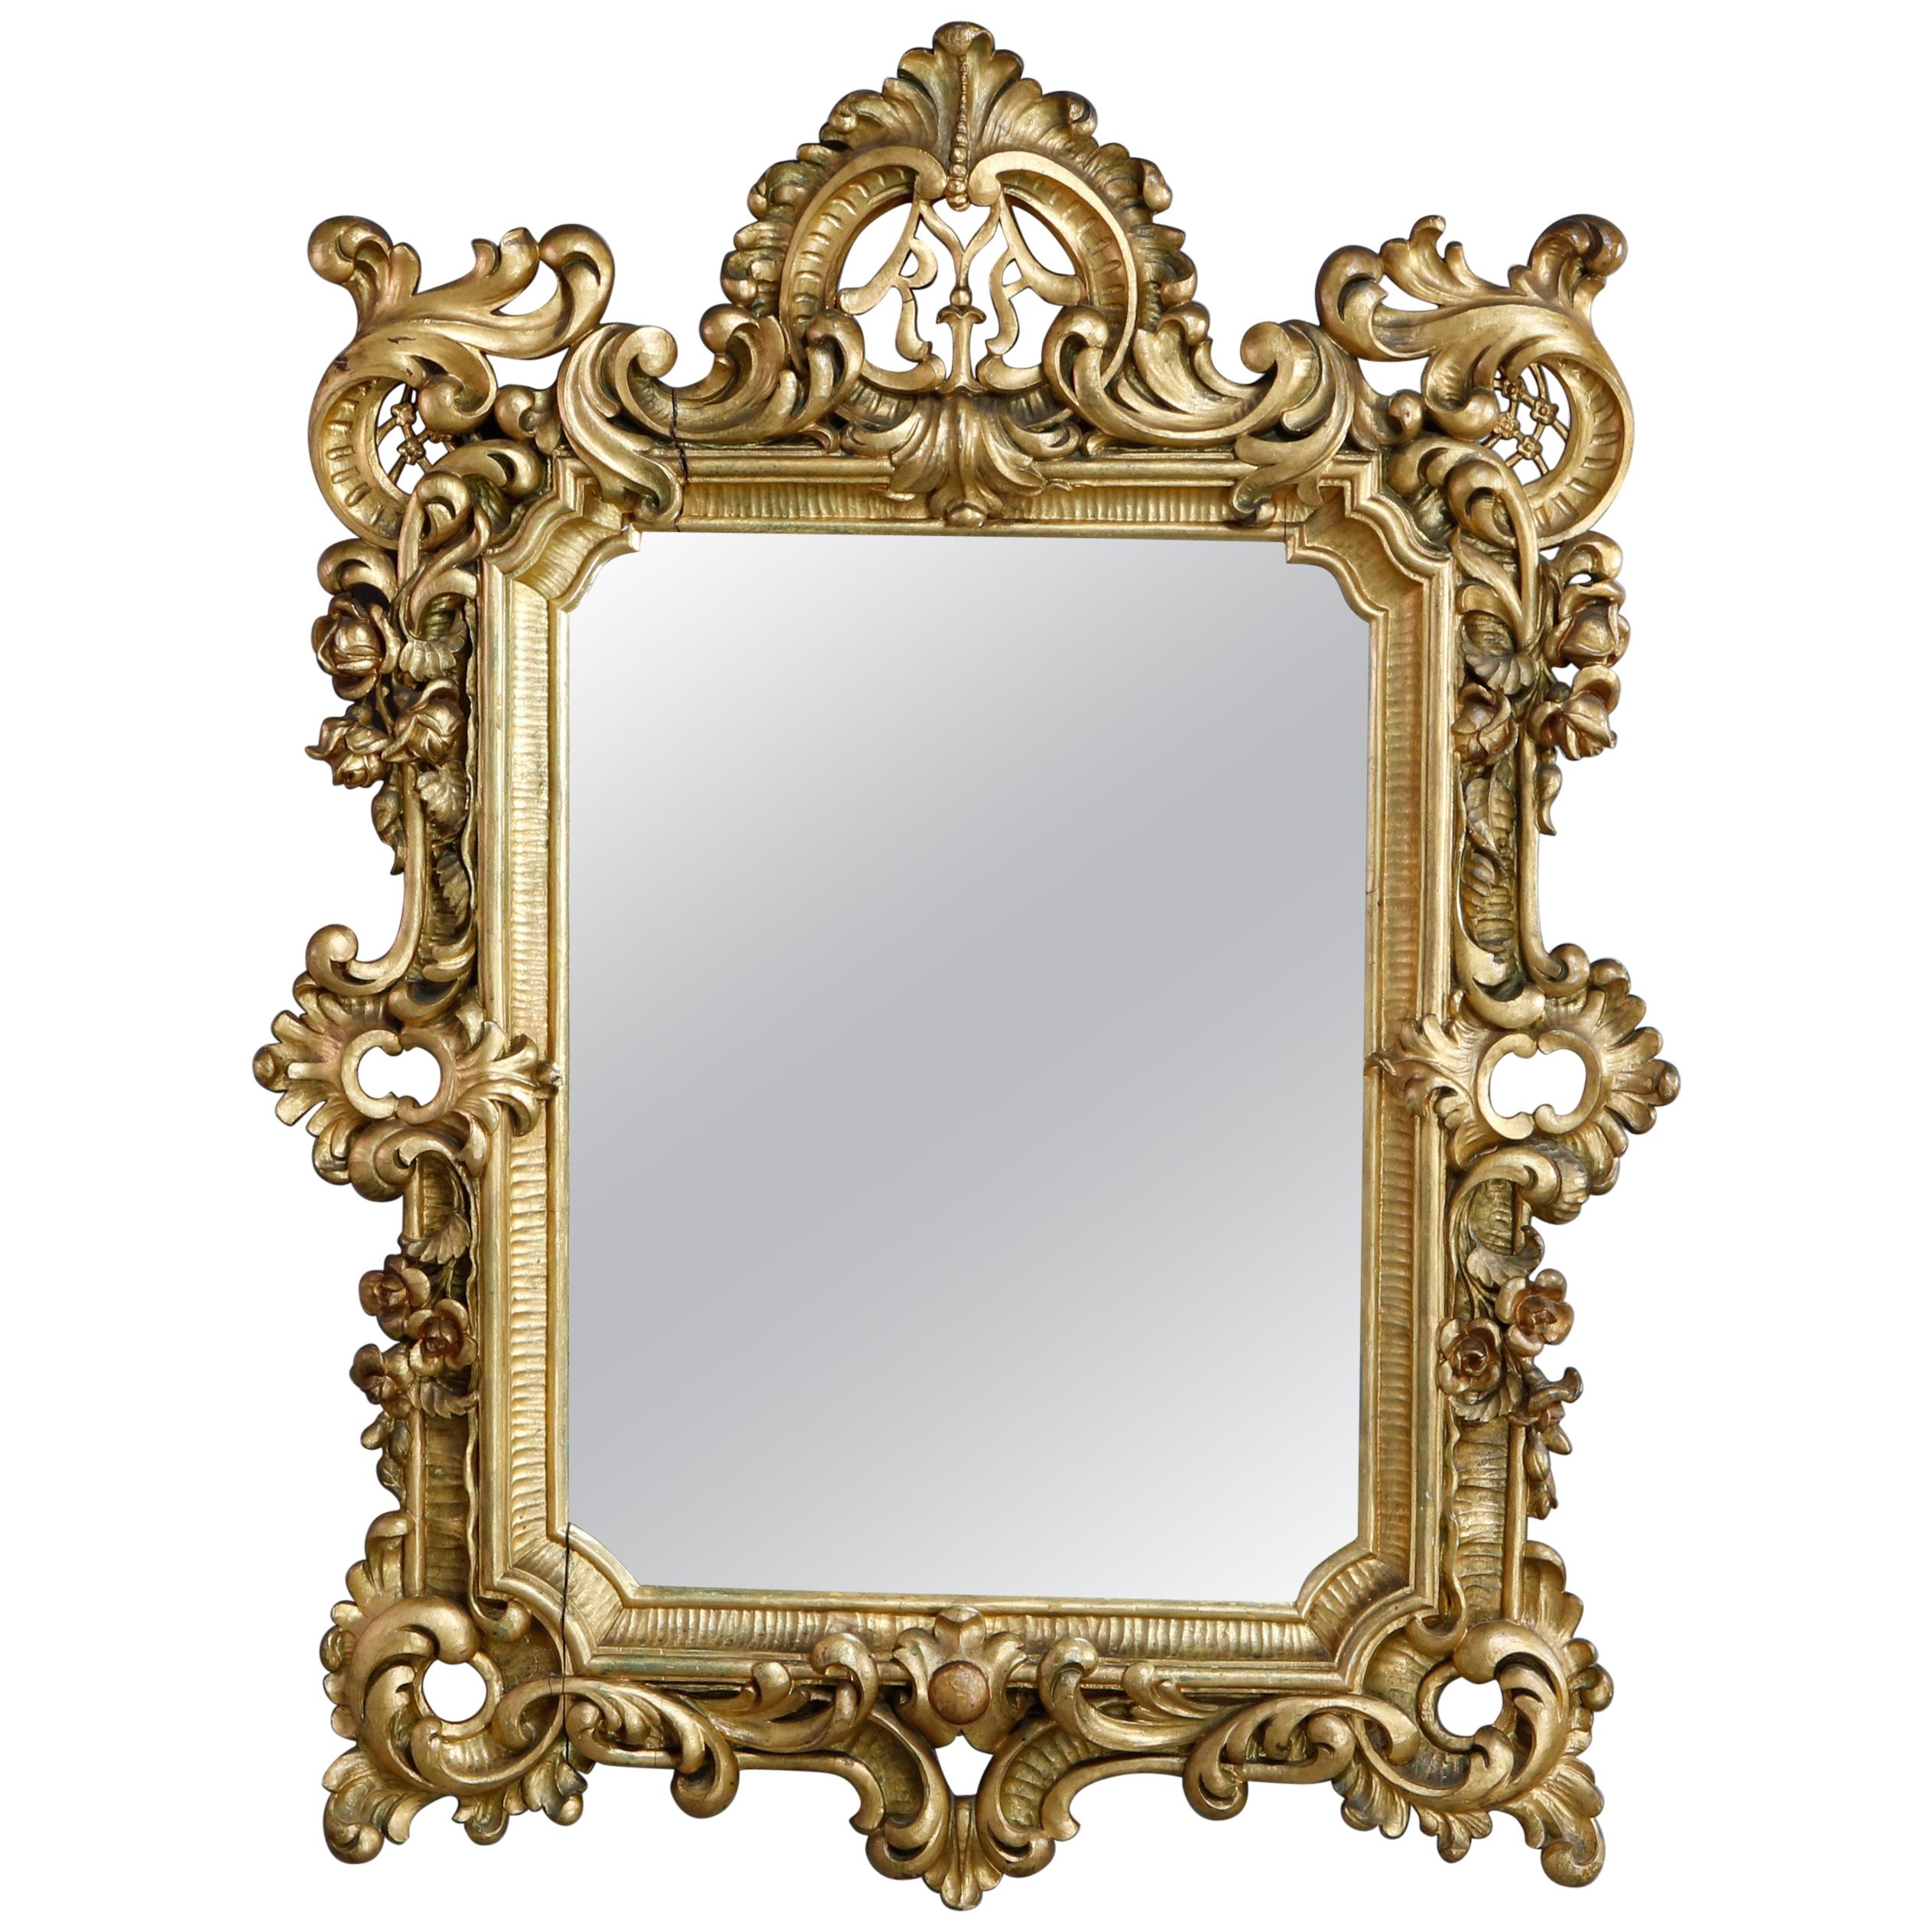 Antique Ornate French Louis XIV Style Giltwood Wall Mirror, Circa 1900